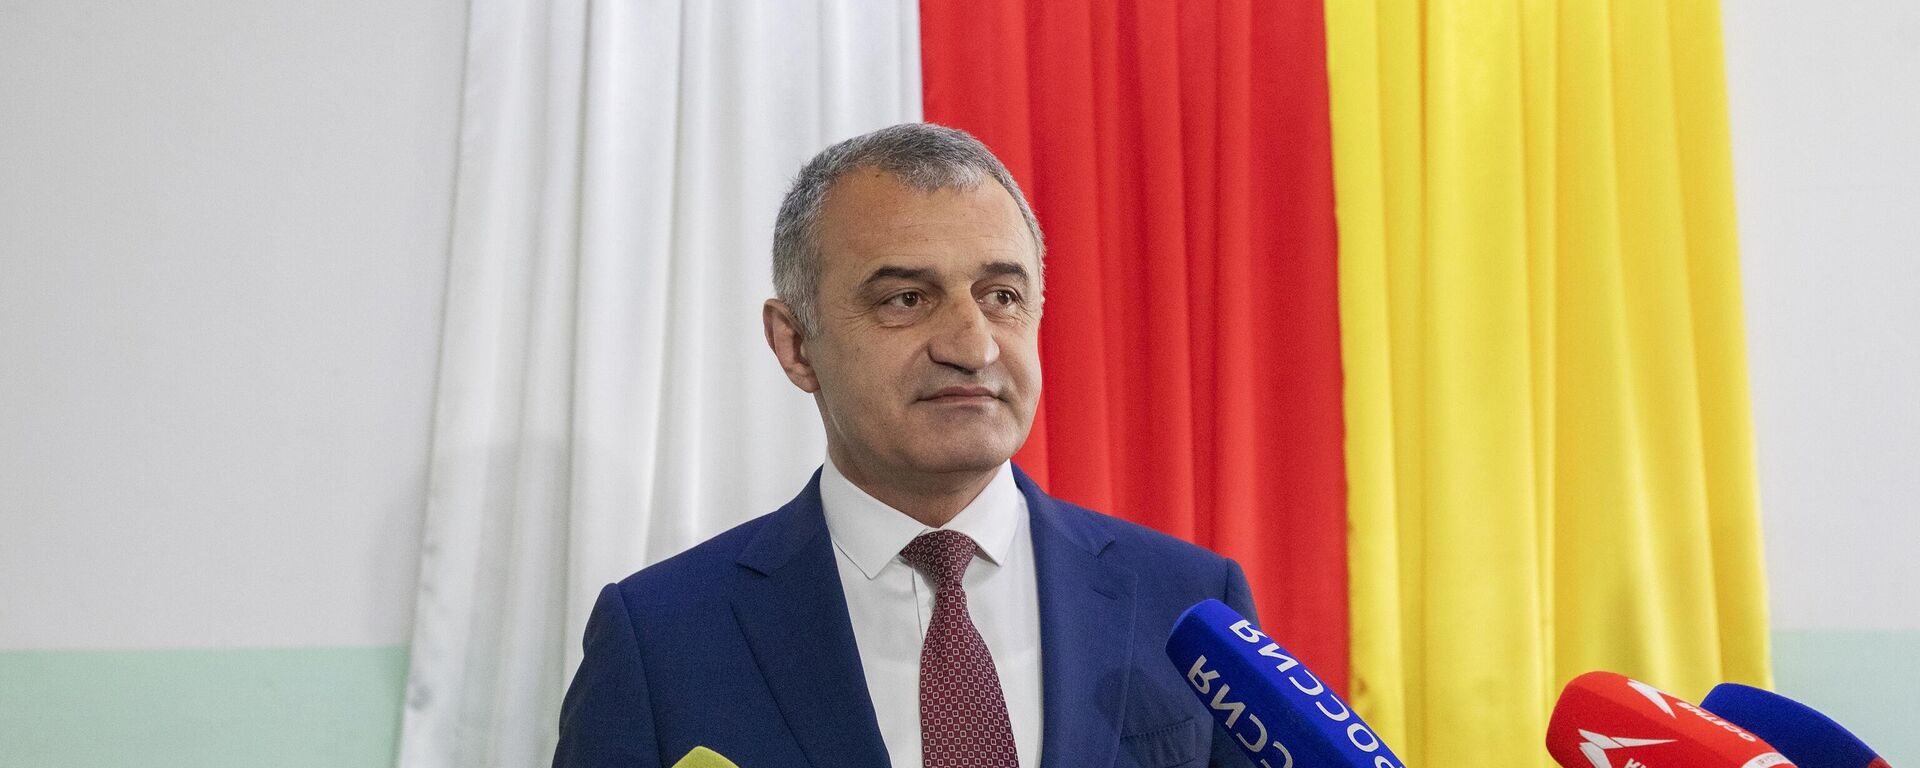 Acting President of South Ossetia Anatoly Bibilov during a press approach at polling station No. 17 at the Sports Palace in Tskhinvali. - Sputnik International, 1920, 21.04.2022